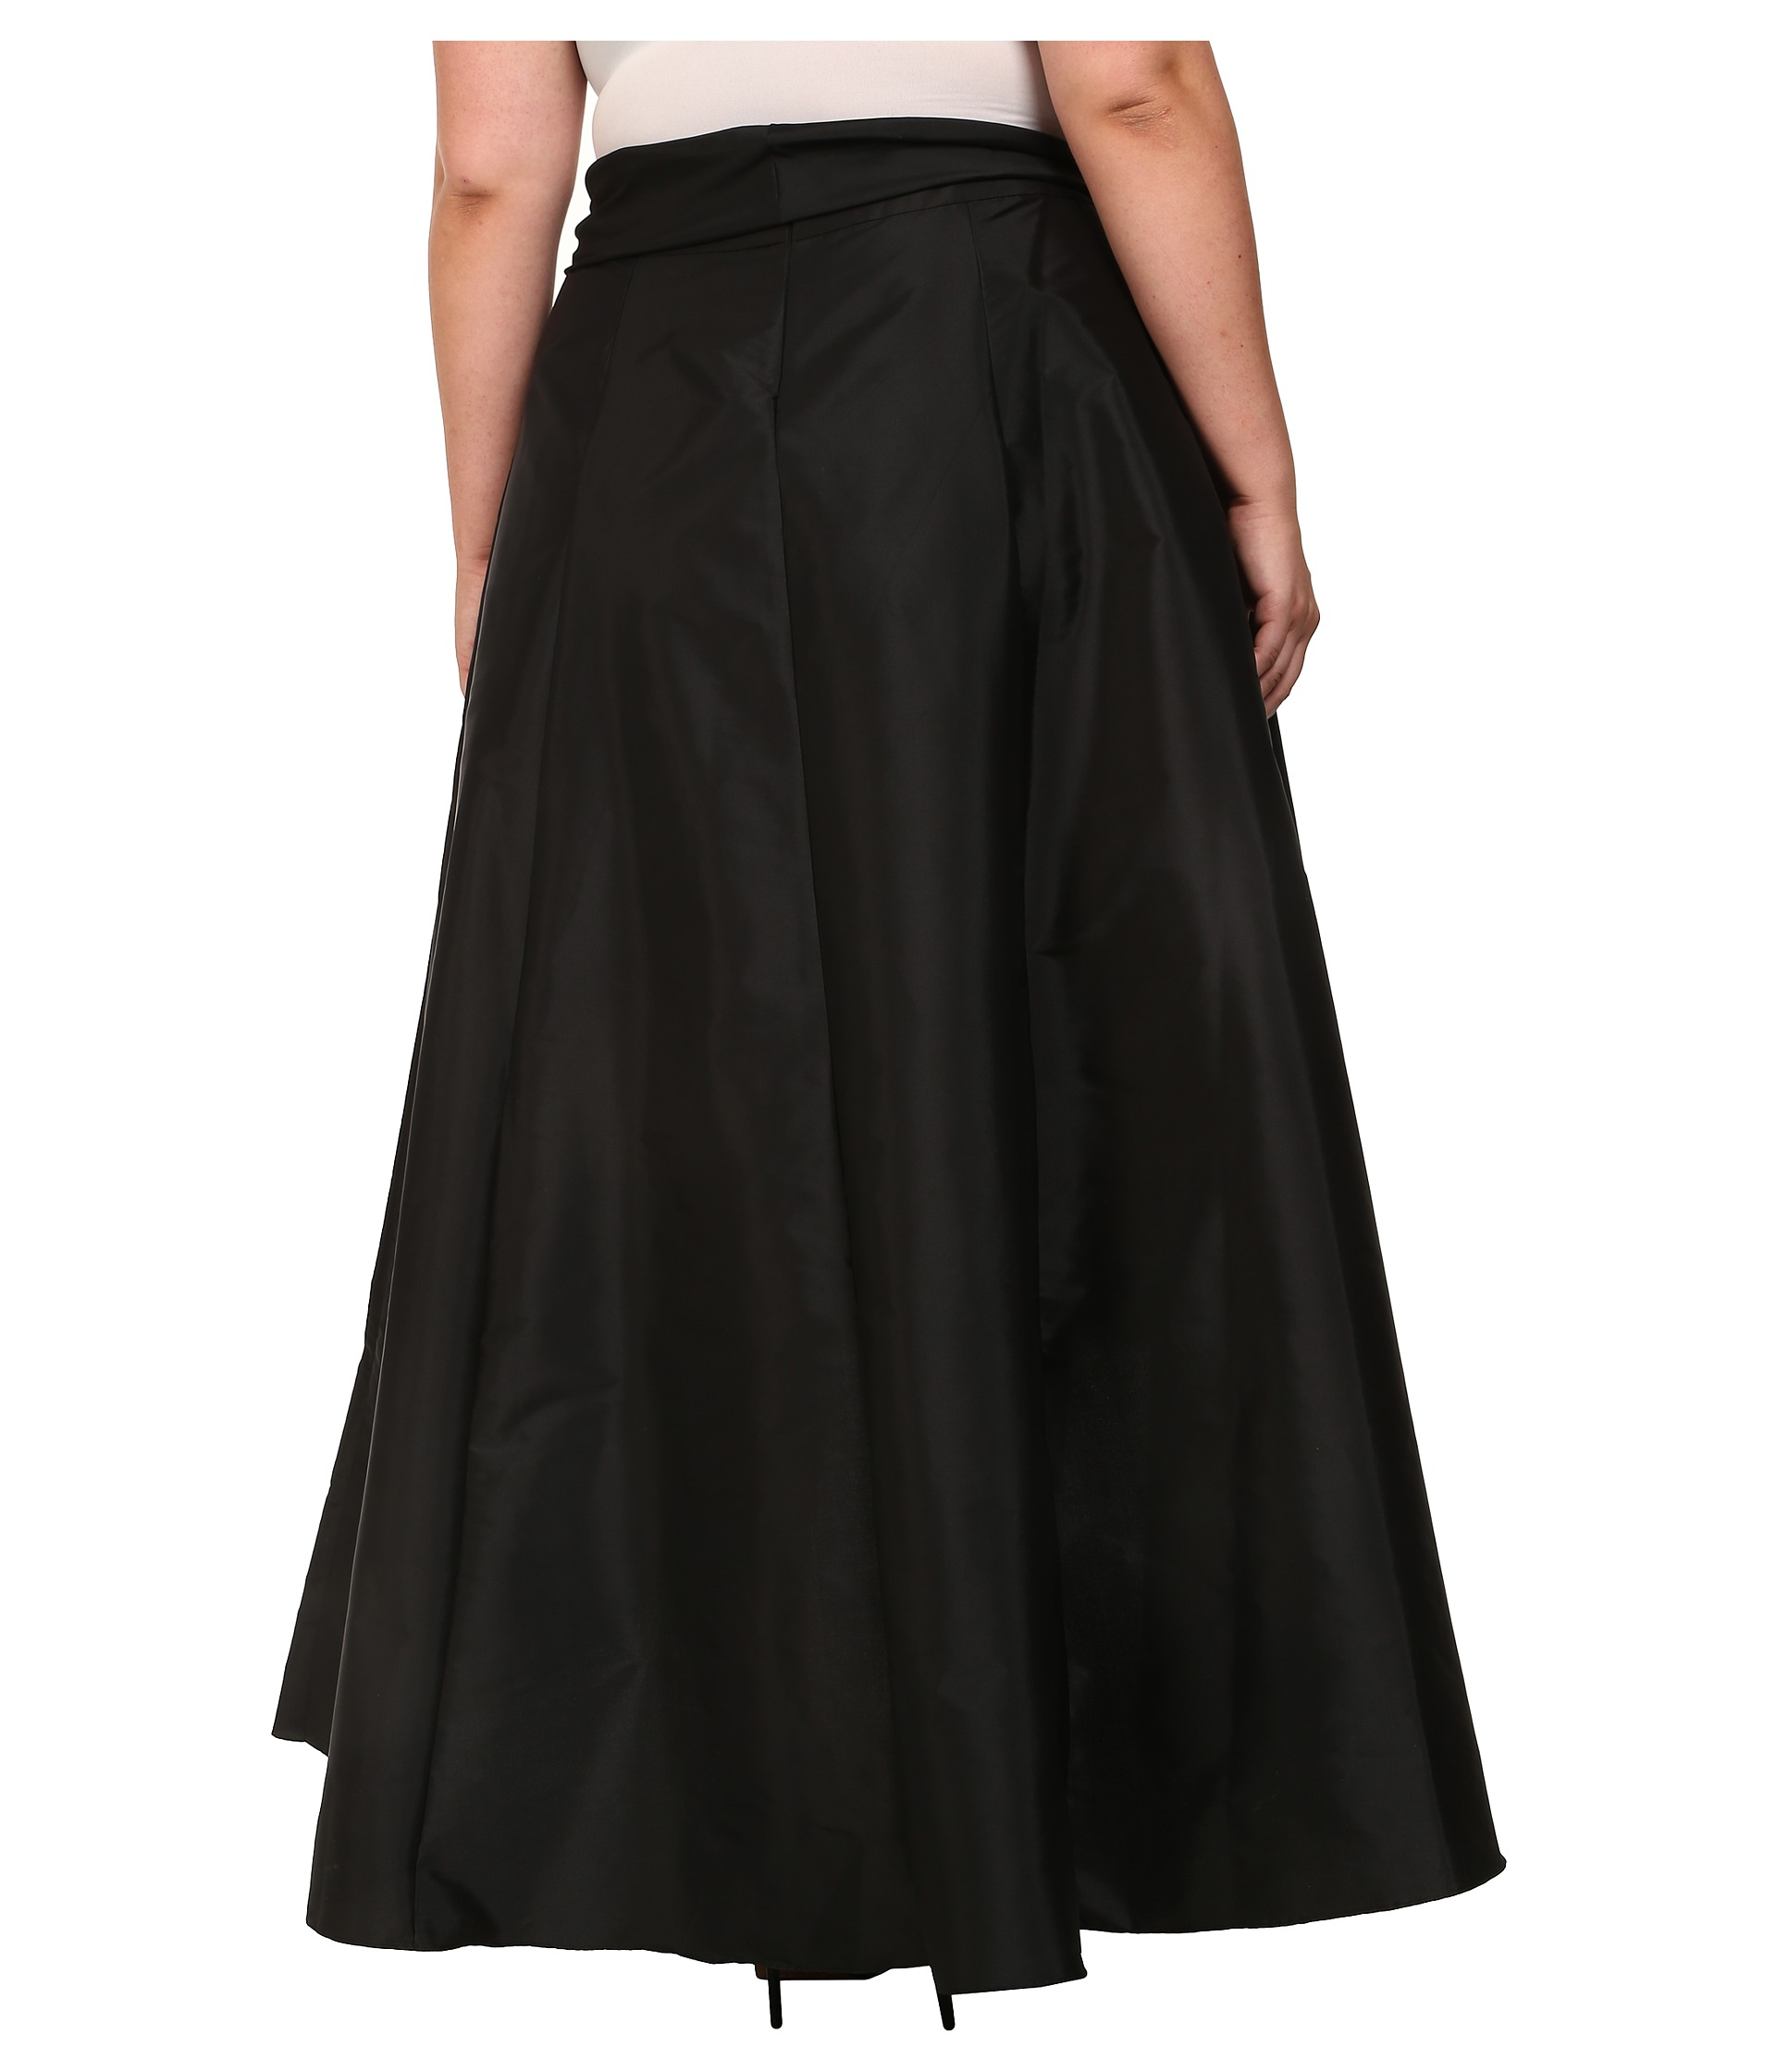 Lyst Adrianna Papell Plus Size High Low Ball Skirt In Black 1645